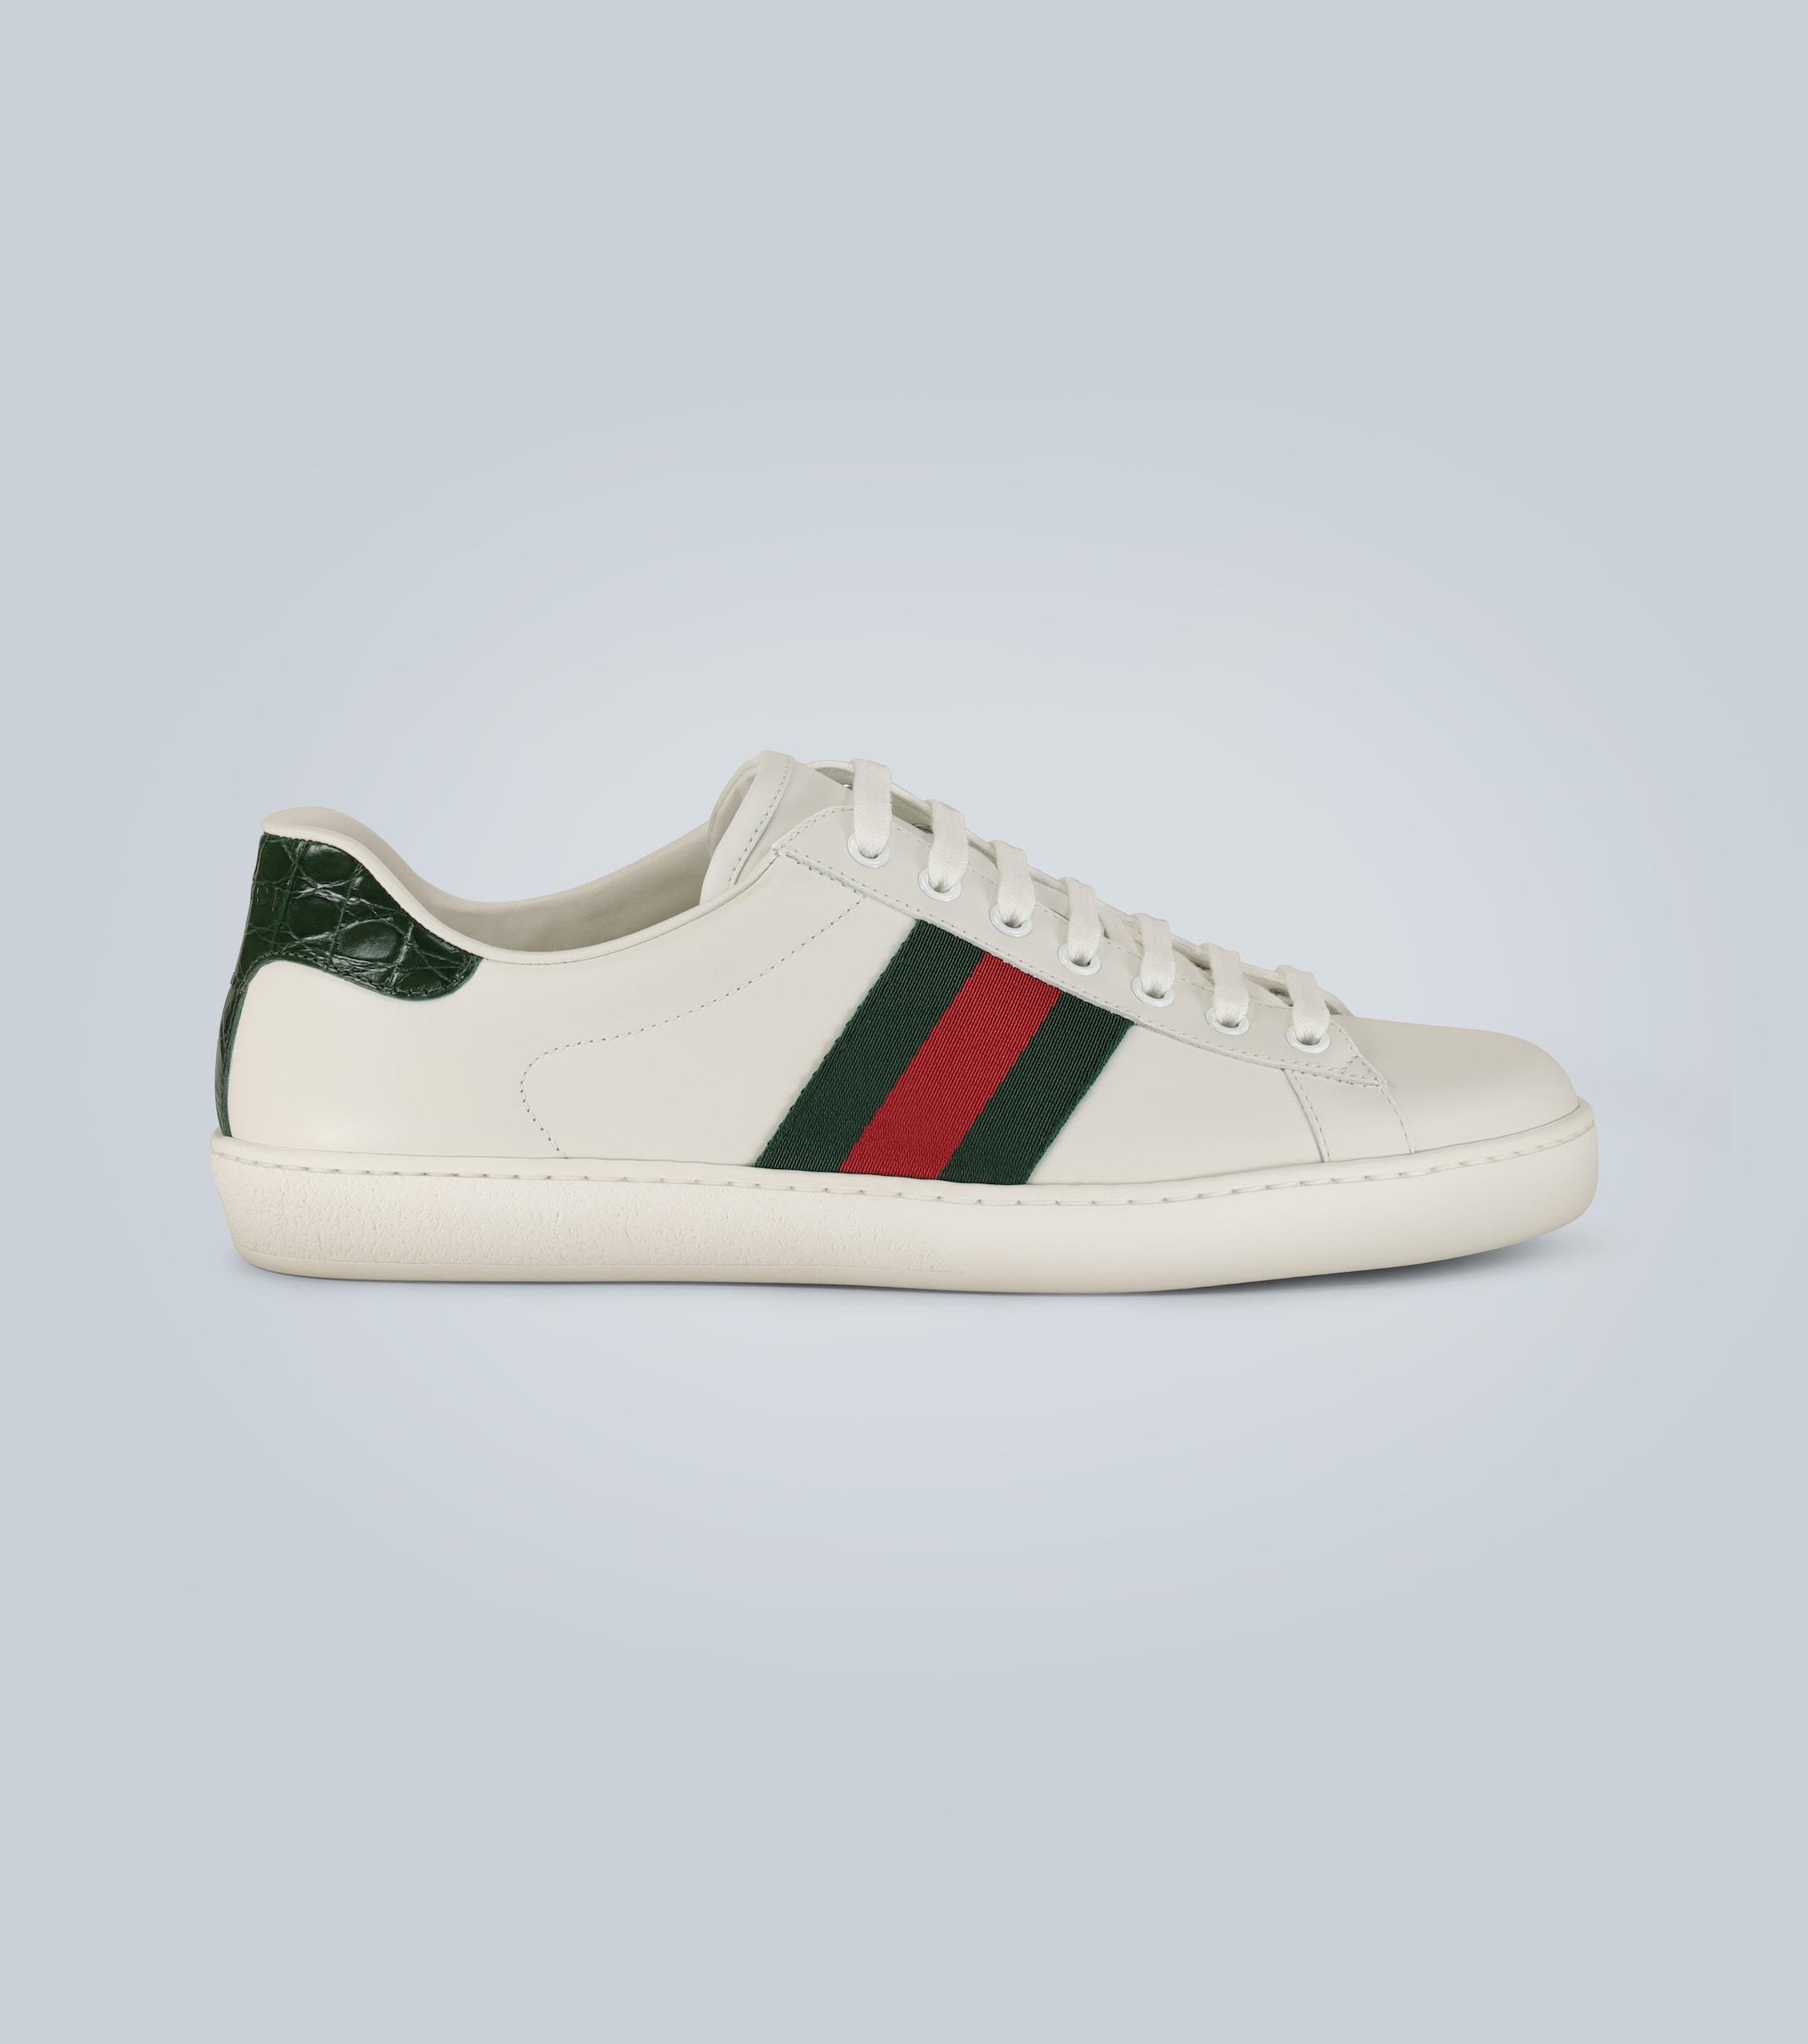 Gucci Ace Leather Sneakers in White - Lyst